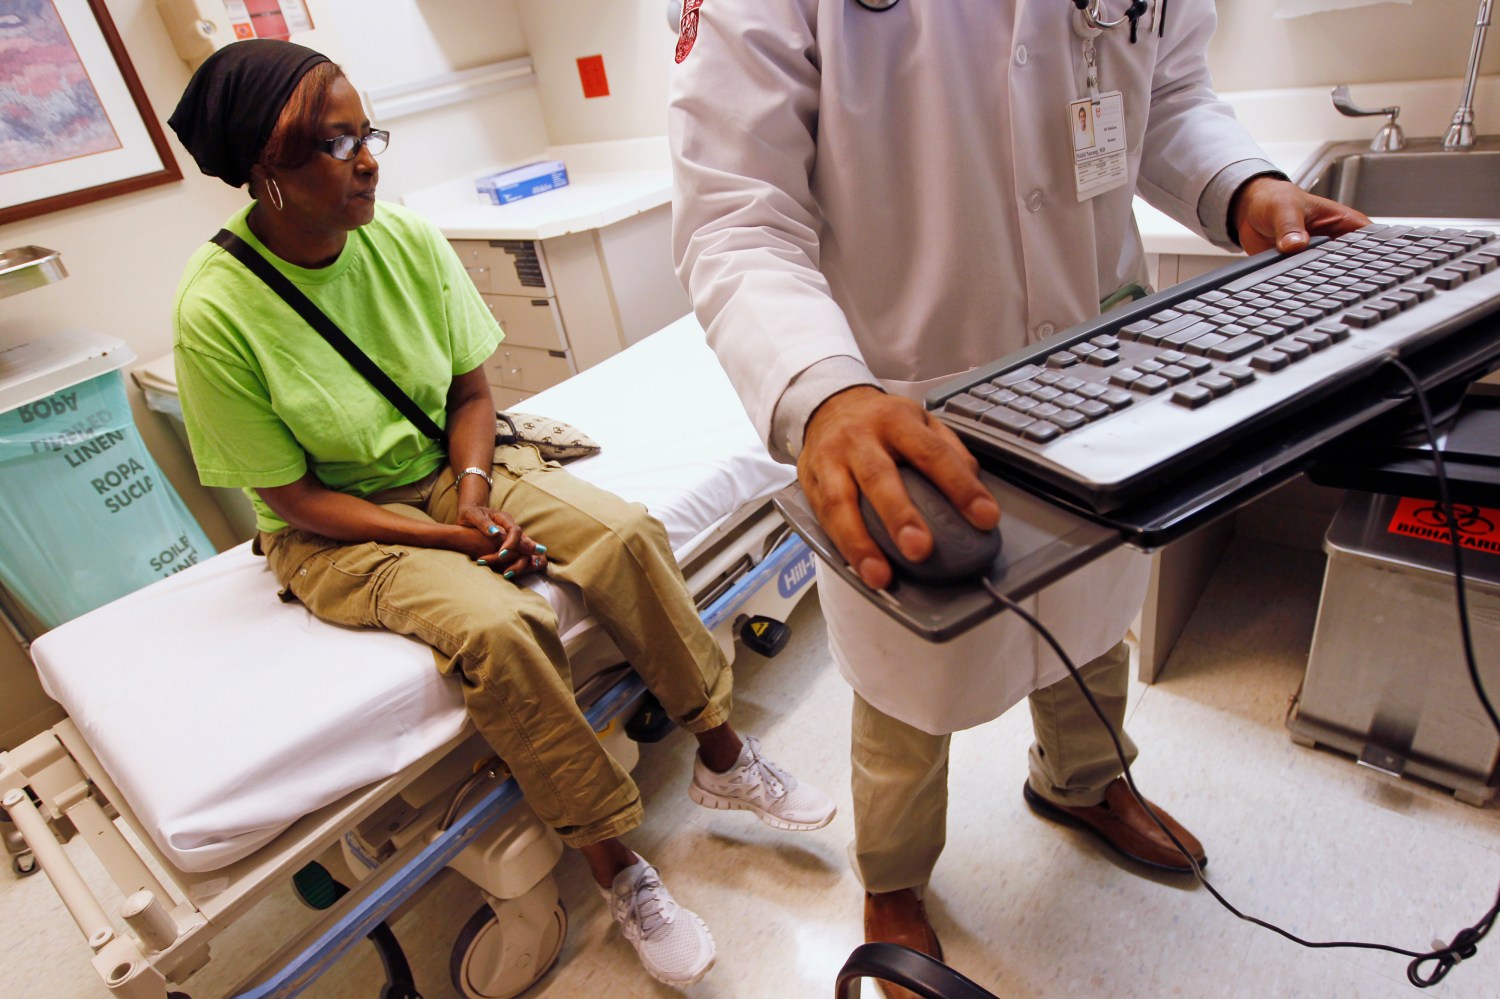 Patient Sharon Dawson Coates (L) waits as Dr. Nikhil Narang enters data into her chart after examining her knee